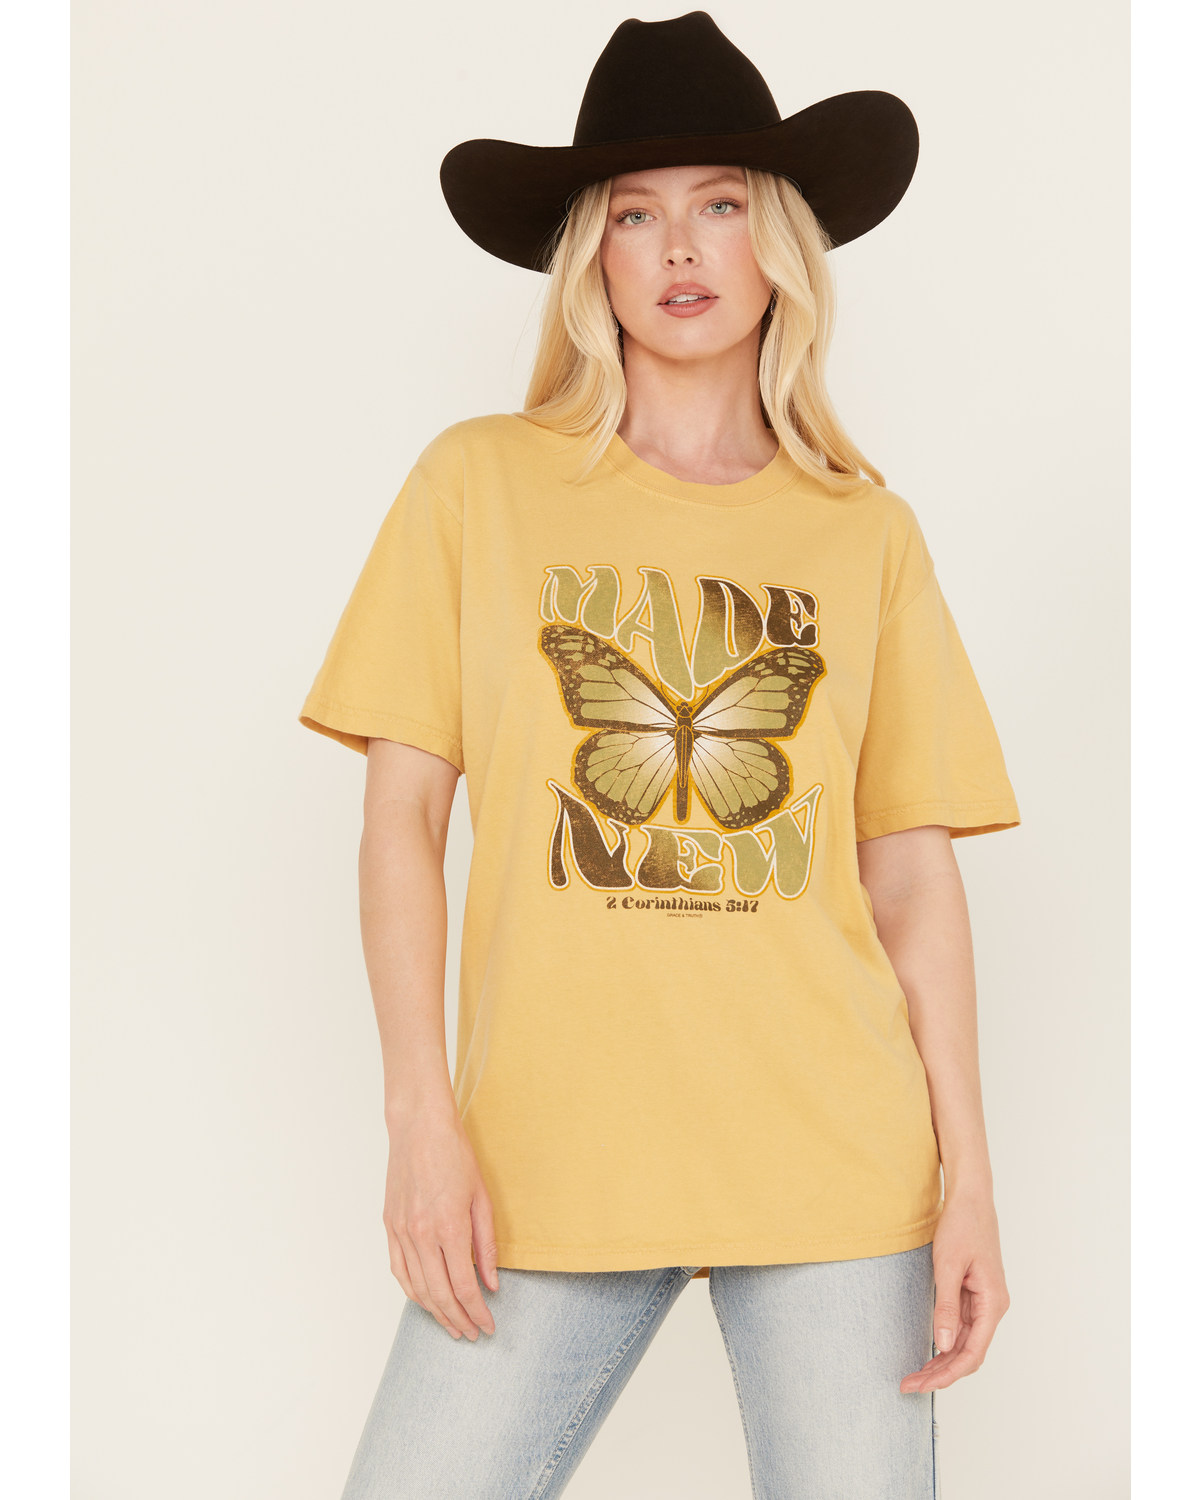 Kerusso Women's Made New Butterfly Graphic Tee